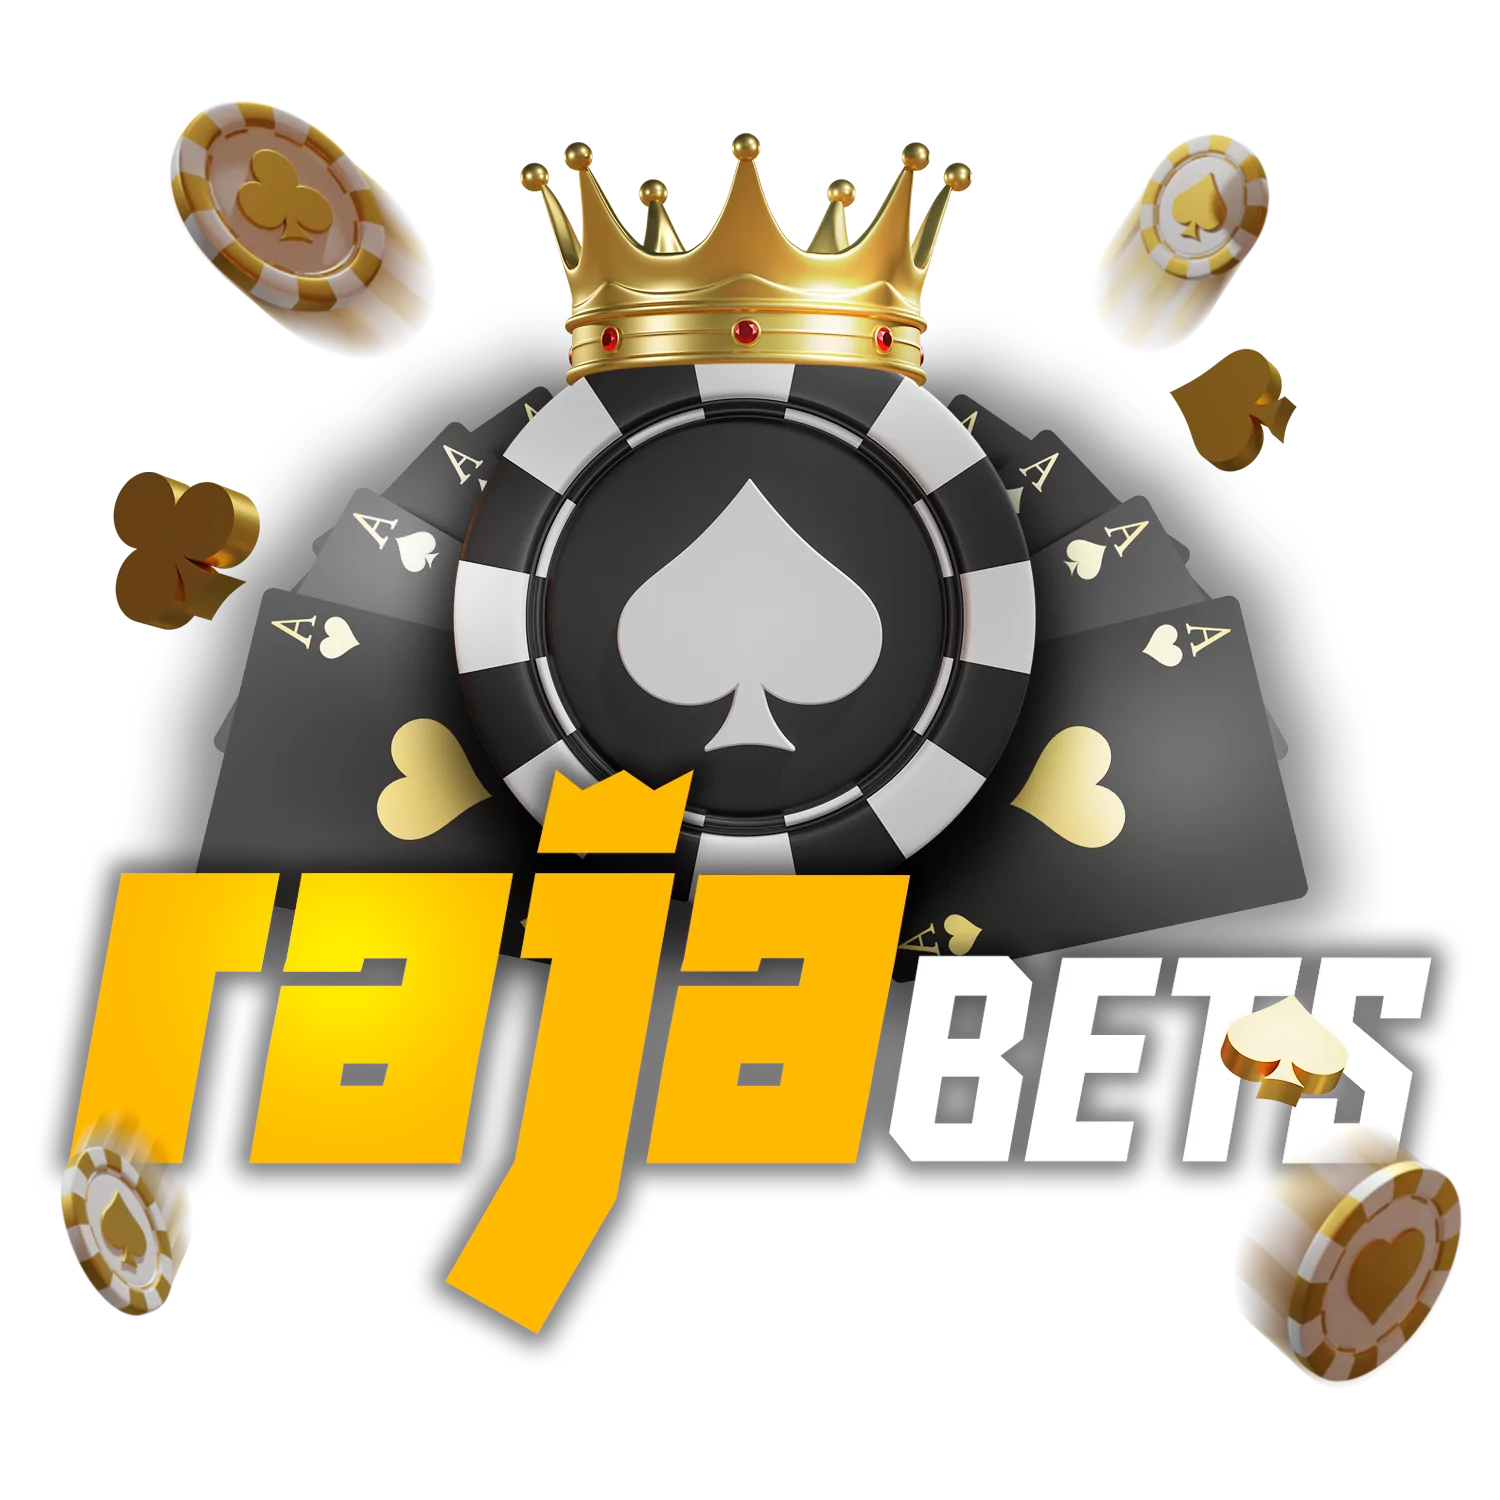 Learn how to play casino games on the Rajabets website or in the app.